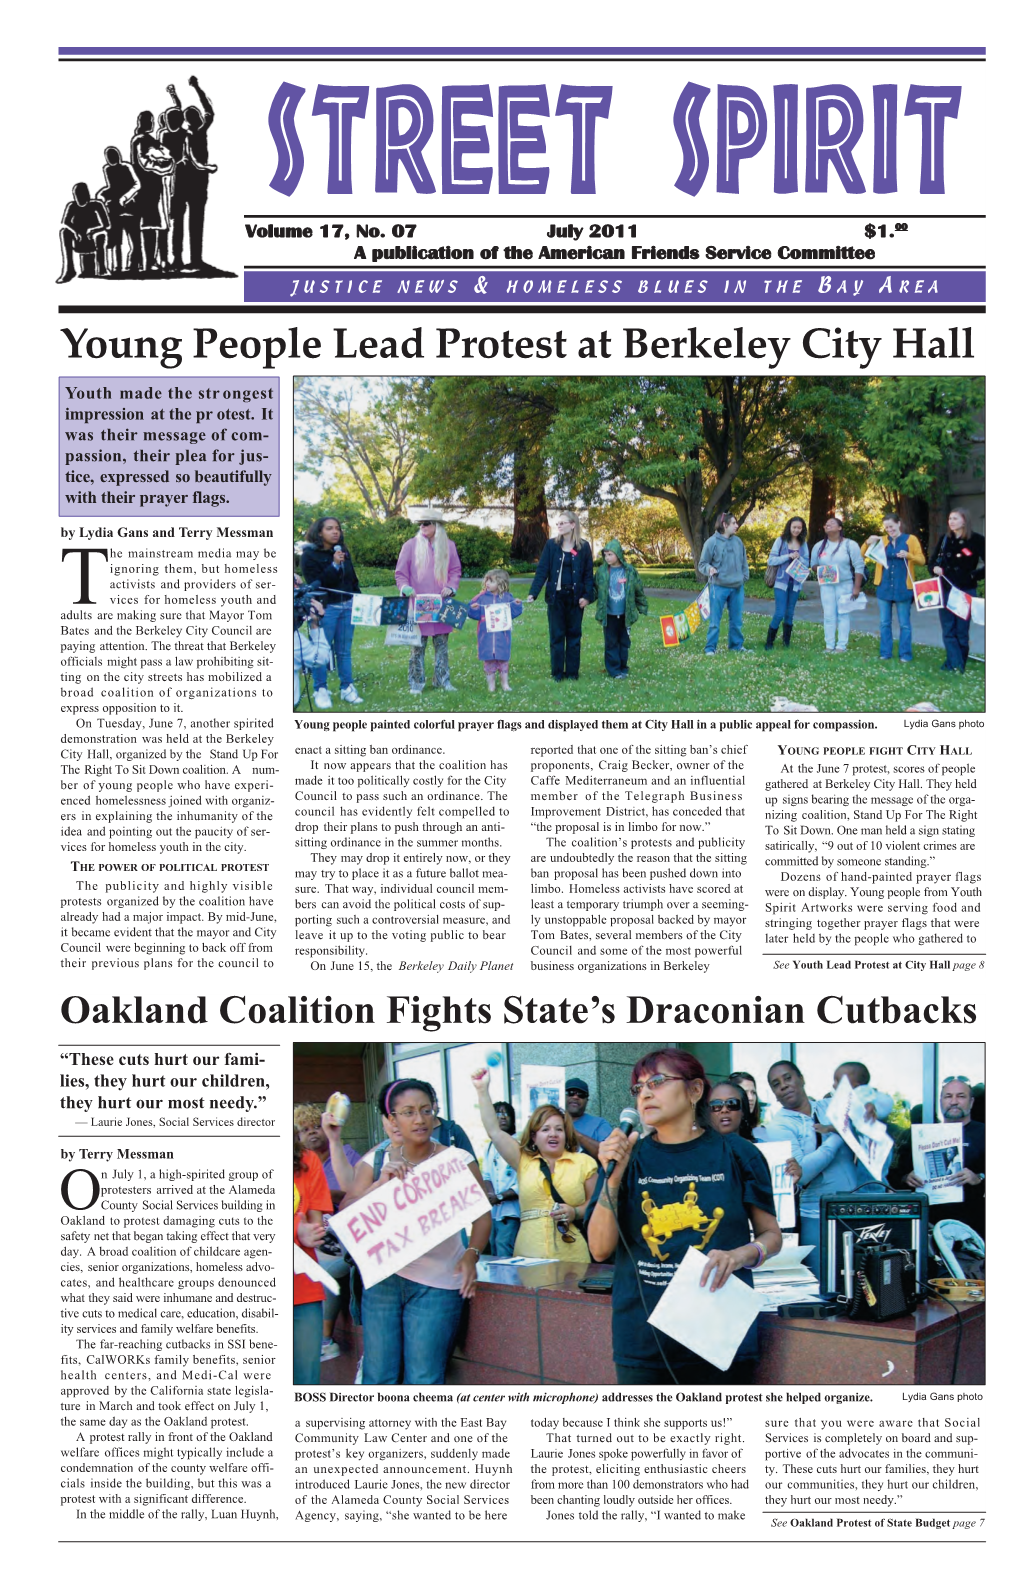 Young People Lead Protest at Berkeley City Hall